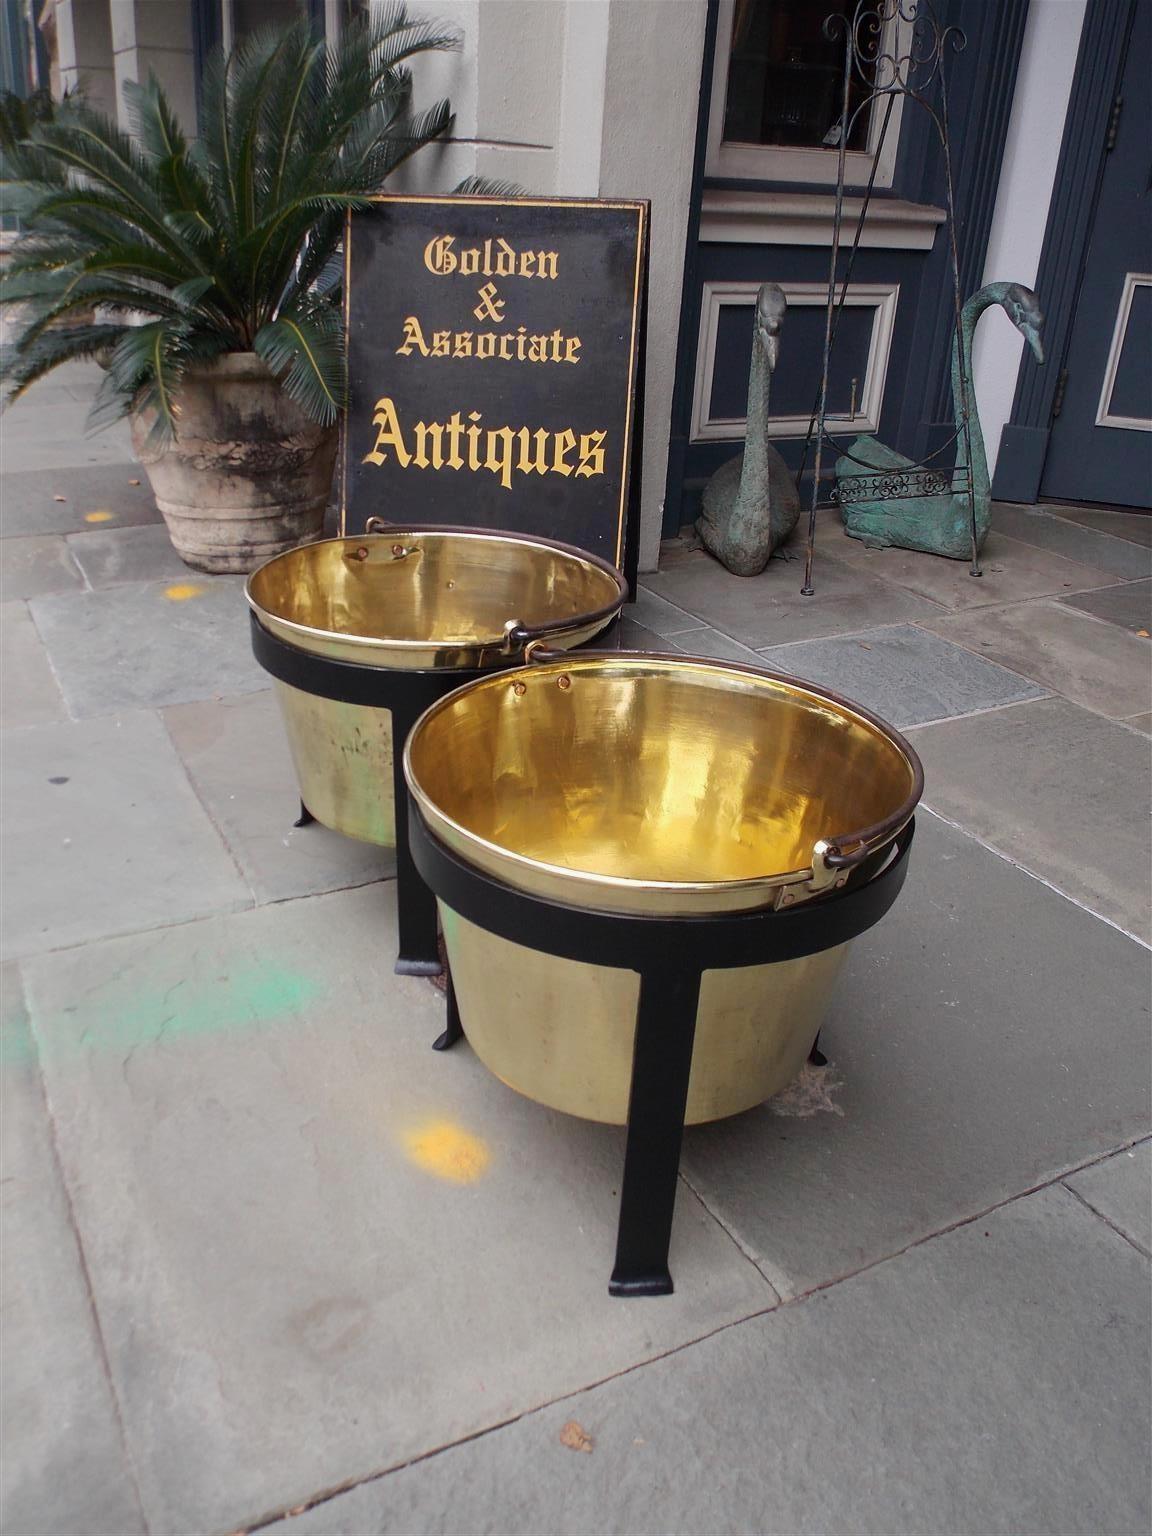 Pair of American brass and wrought iron plantation cauldrons with original scrolled handles fitted on a circular three legged banded stand with splayed feet. Mid-19th century stamped by maker Hiram W. Hayden, Waterbury, CT.